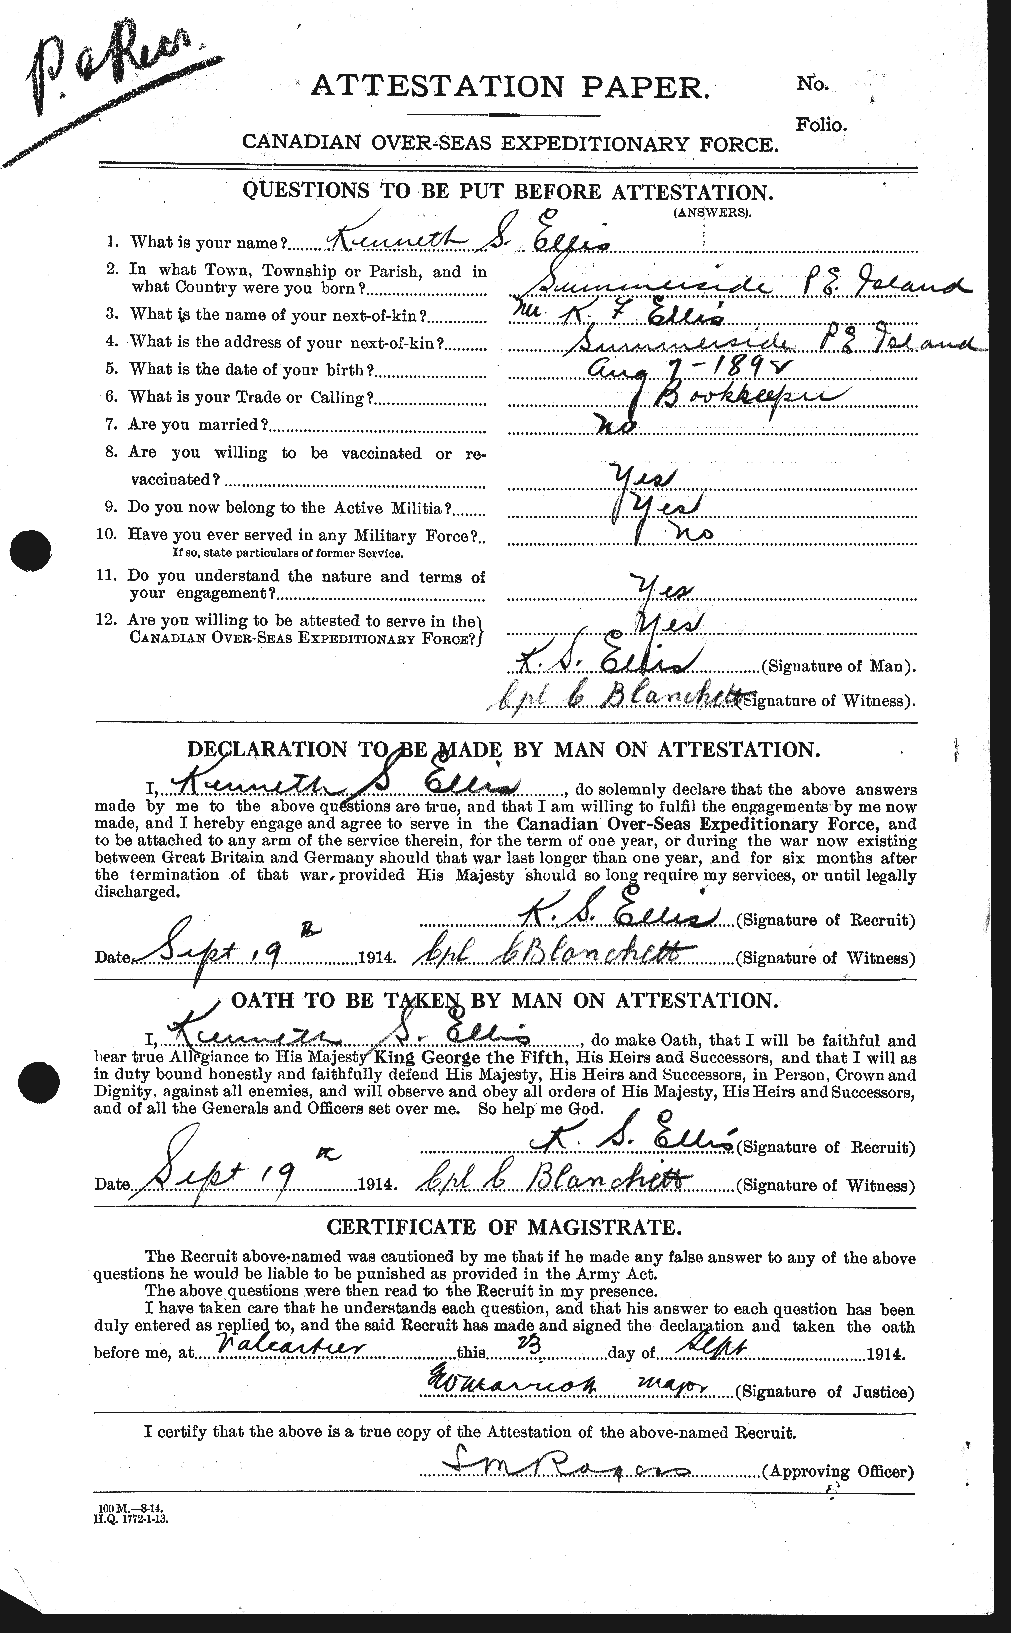 Personnel Records of the First World War - CEF 200136a